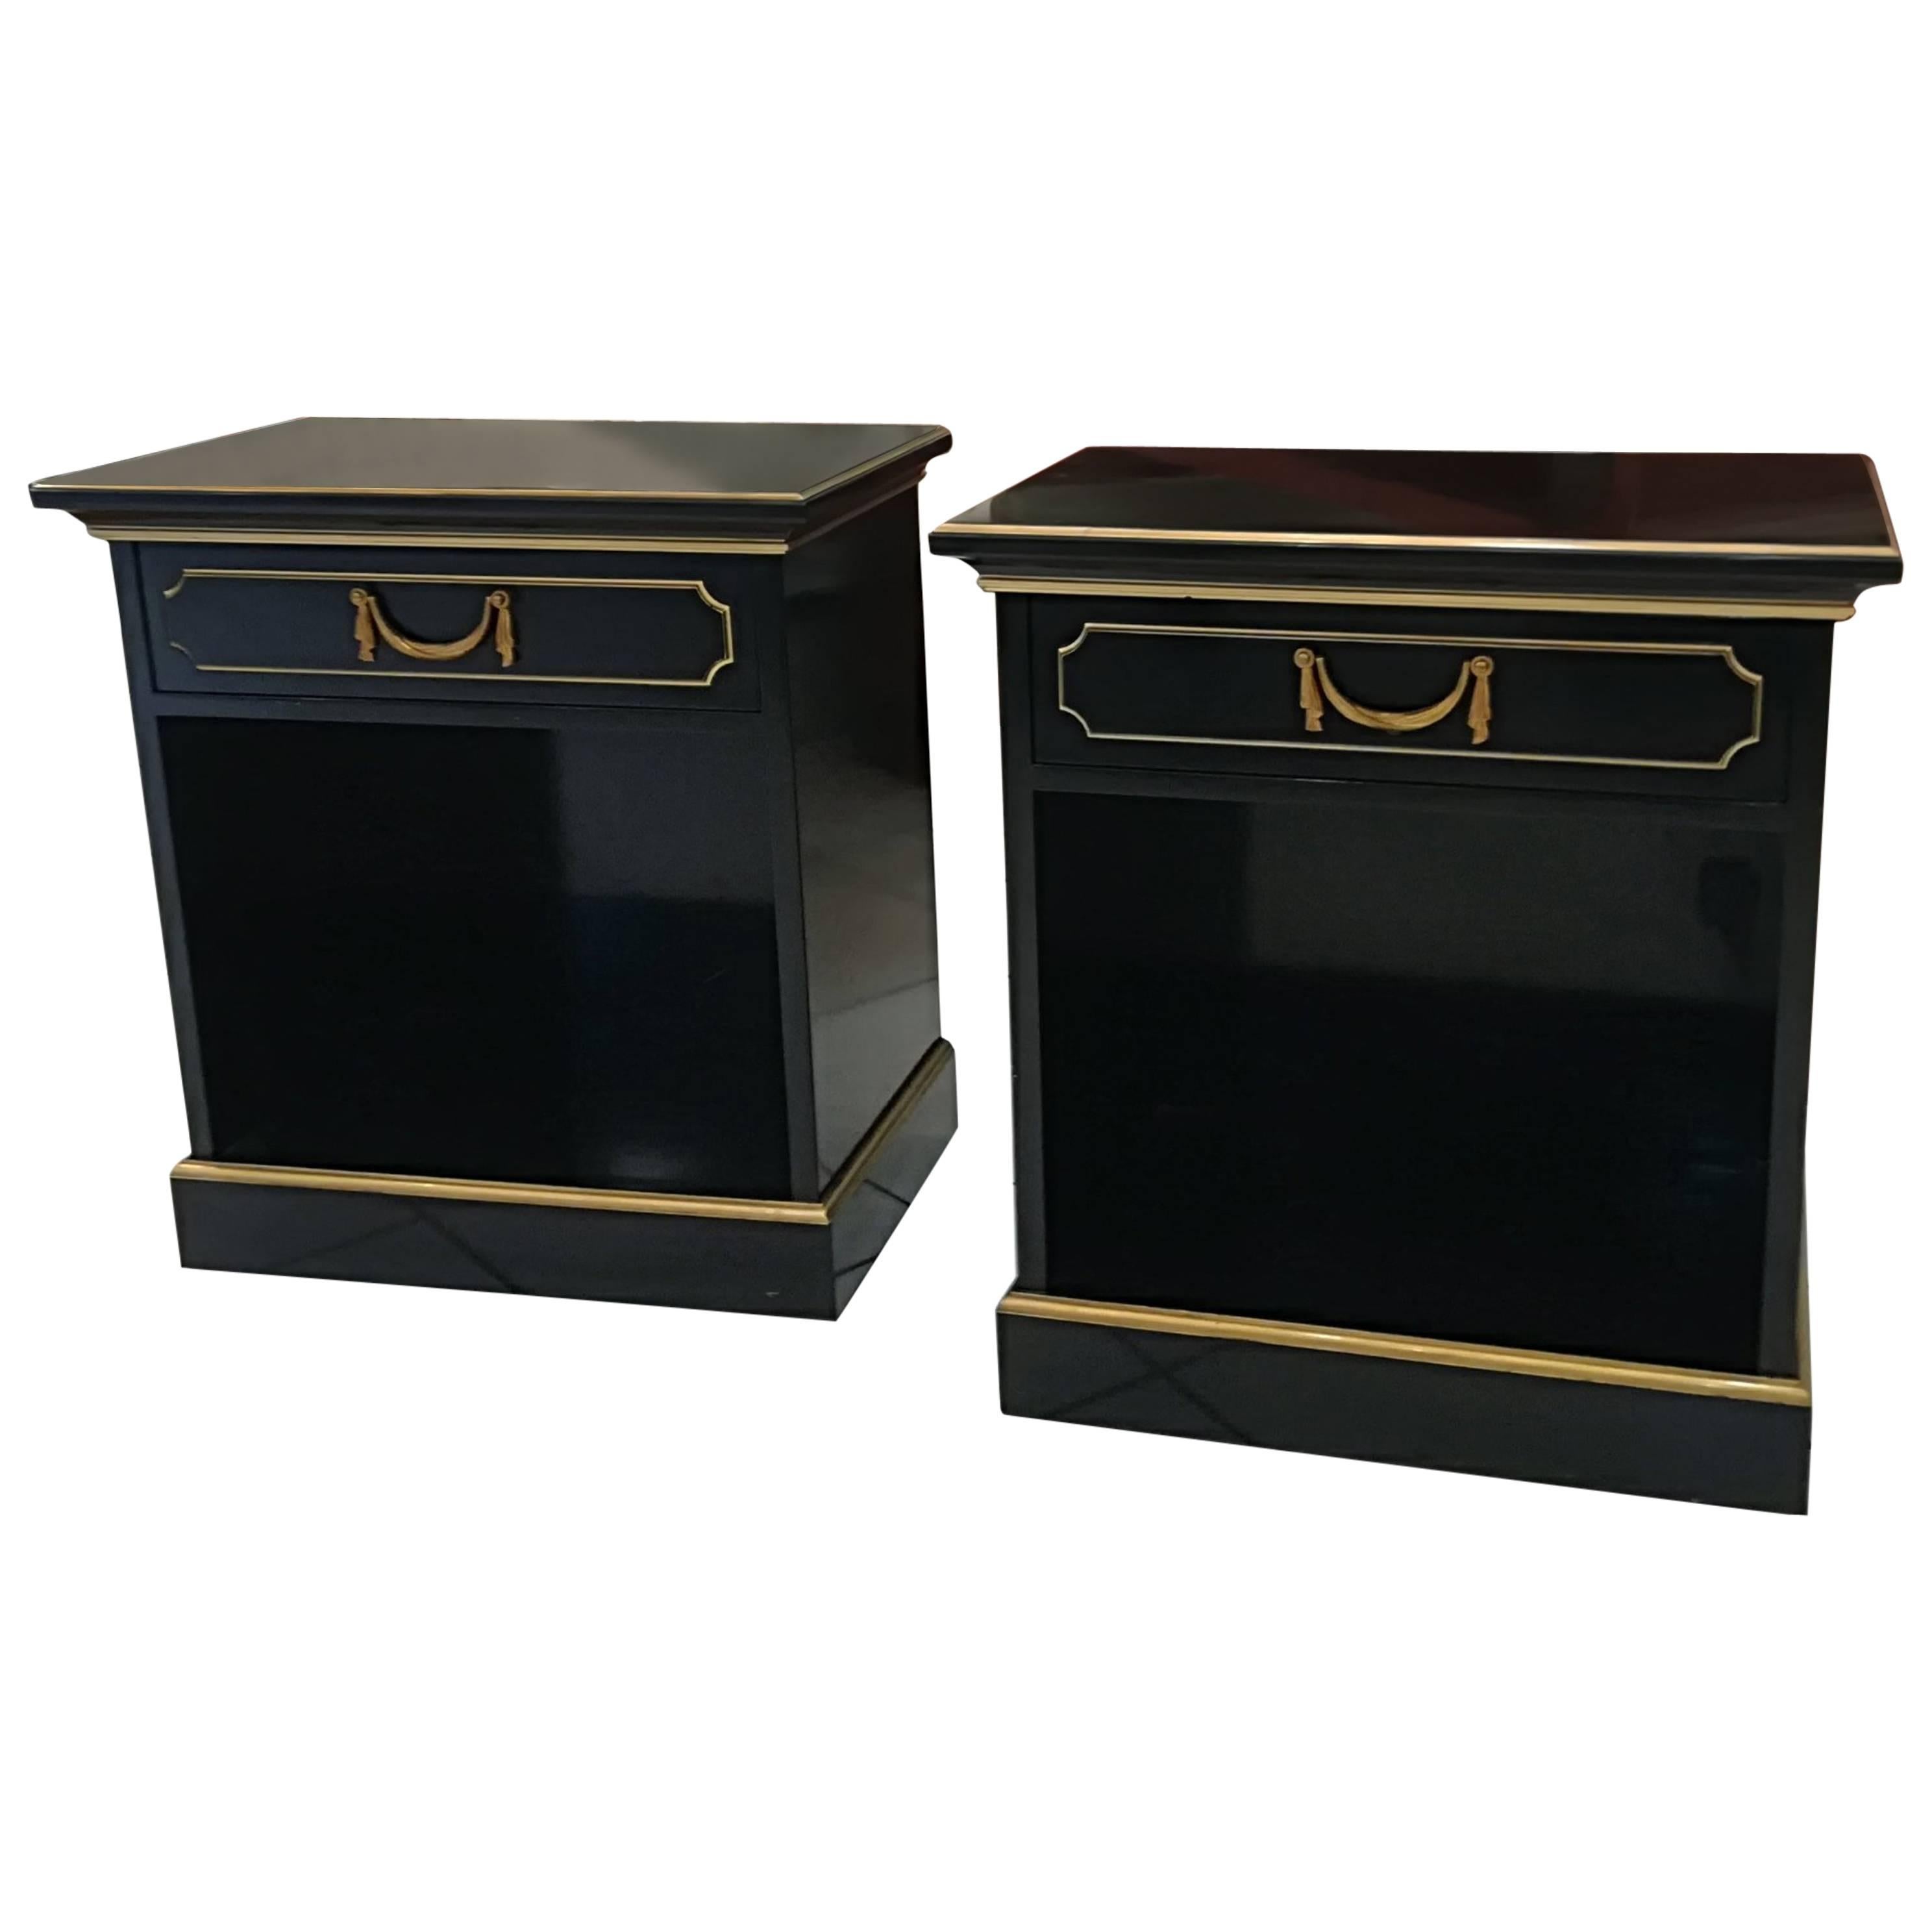 Pair Of Bedside Or side Tables By Maurice Hirch Circa 1940